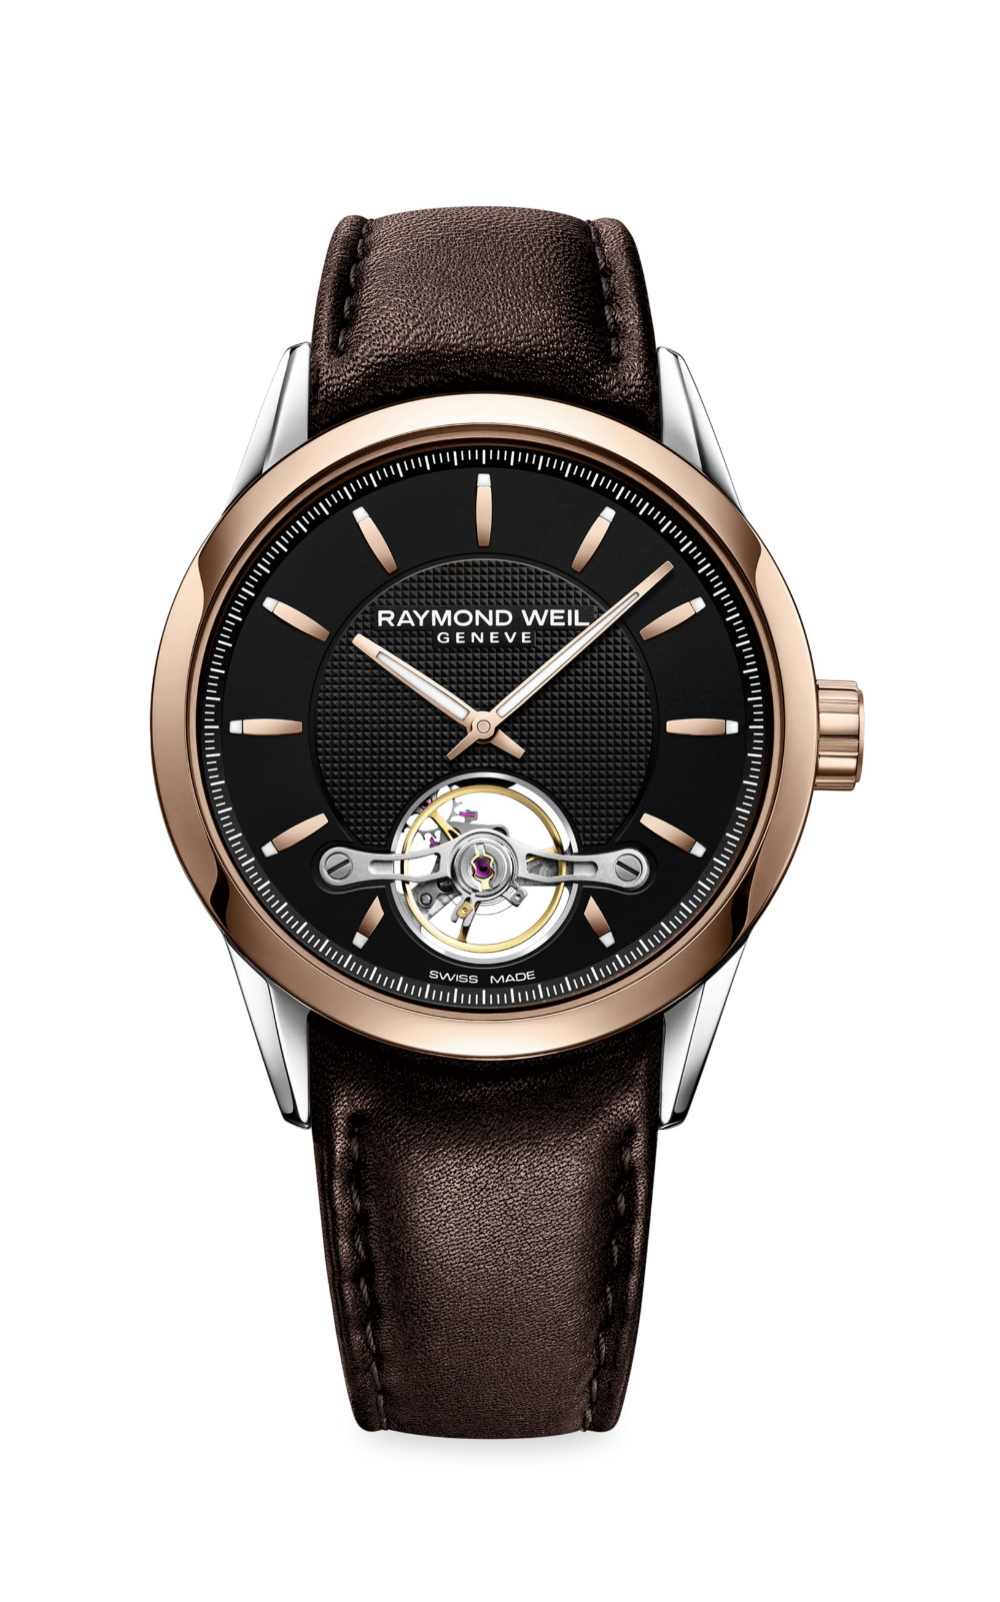 Raymond Weil Freelancer Calibre 42MM Two Tone Stainless Steel & Leather Strap Automatic Watch.